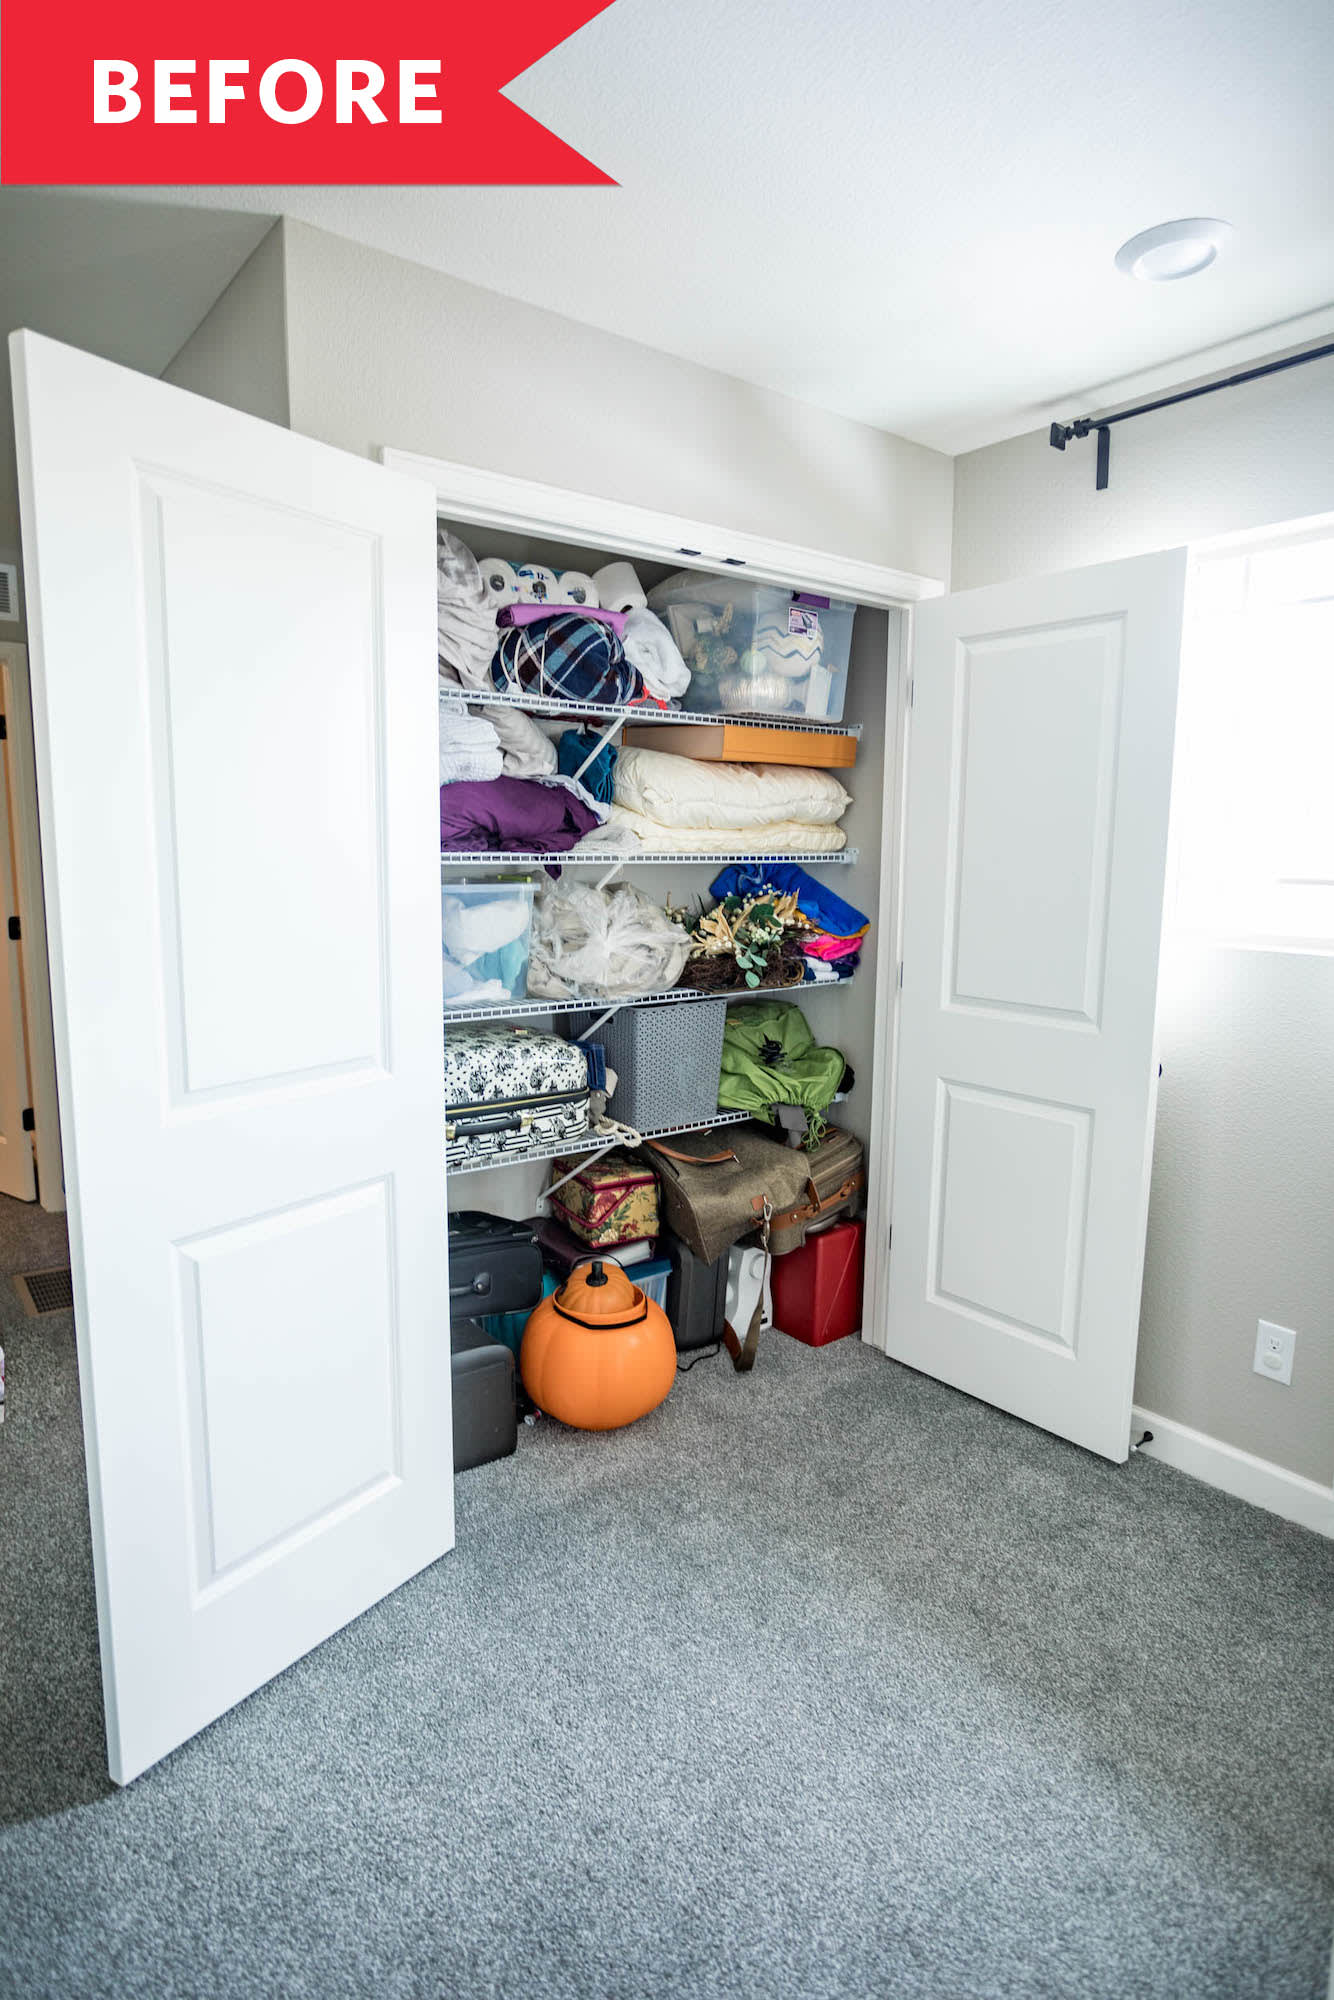 Project Linen Closet Reveal {pretty and organized!} - Fox Hollow